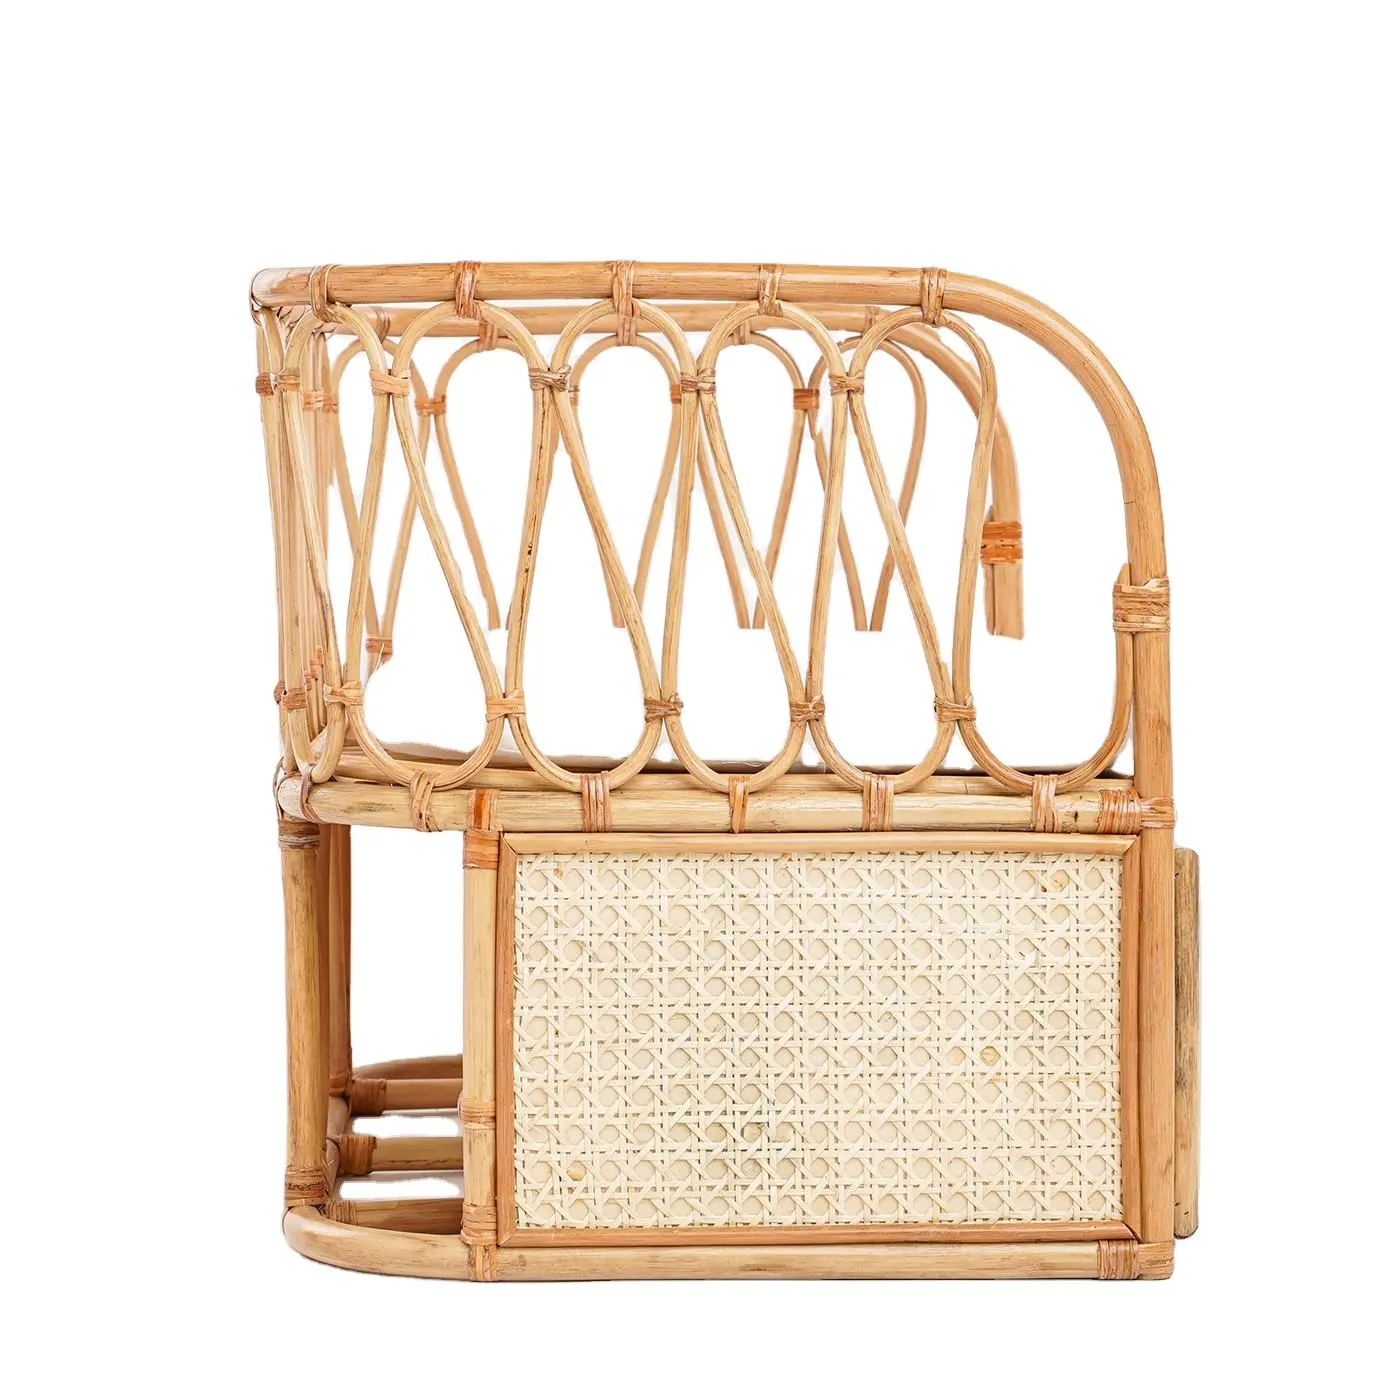 Uniperor Best Selling High Quality Natural Rattan Bed For Dog And Cat Woven Rattan Pet House Handmade In Vietnam